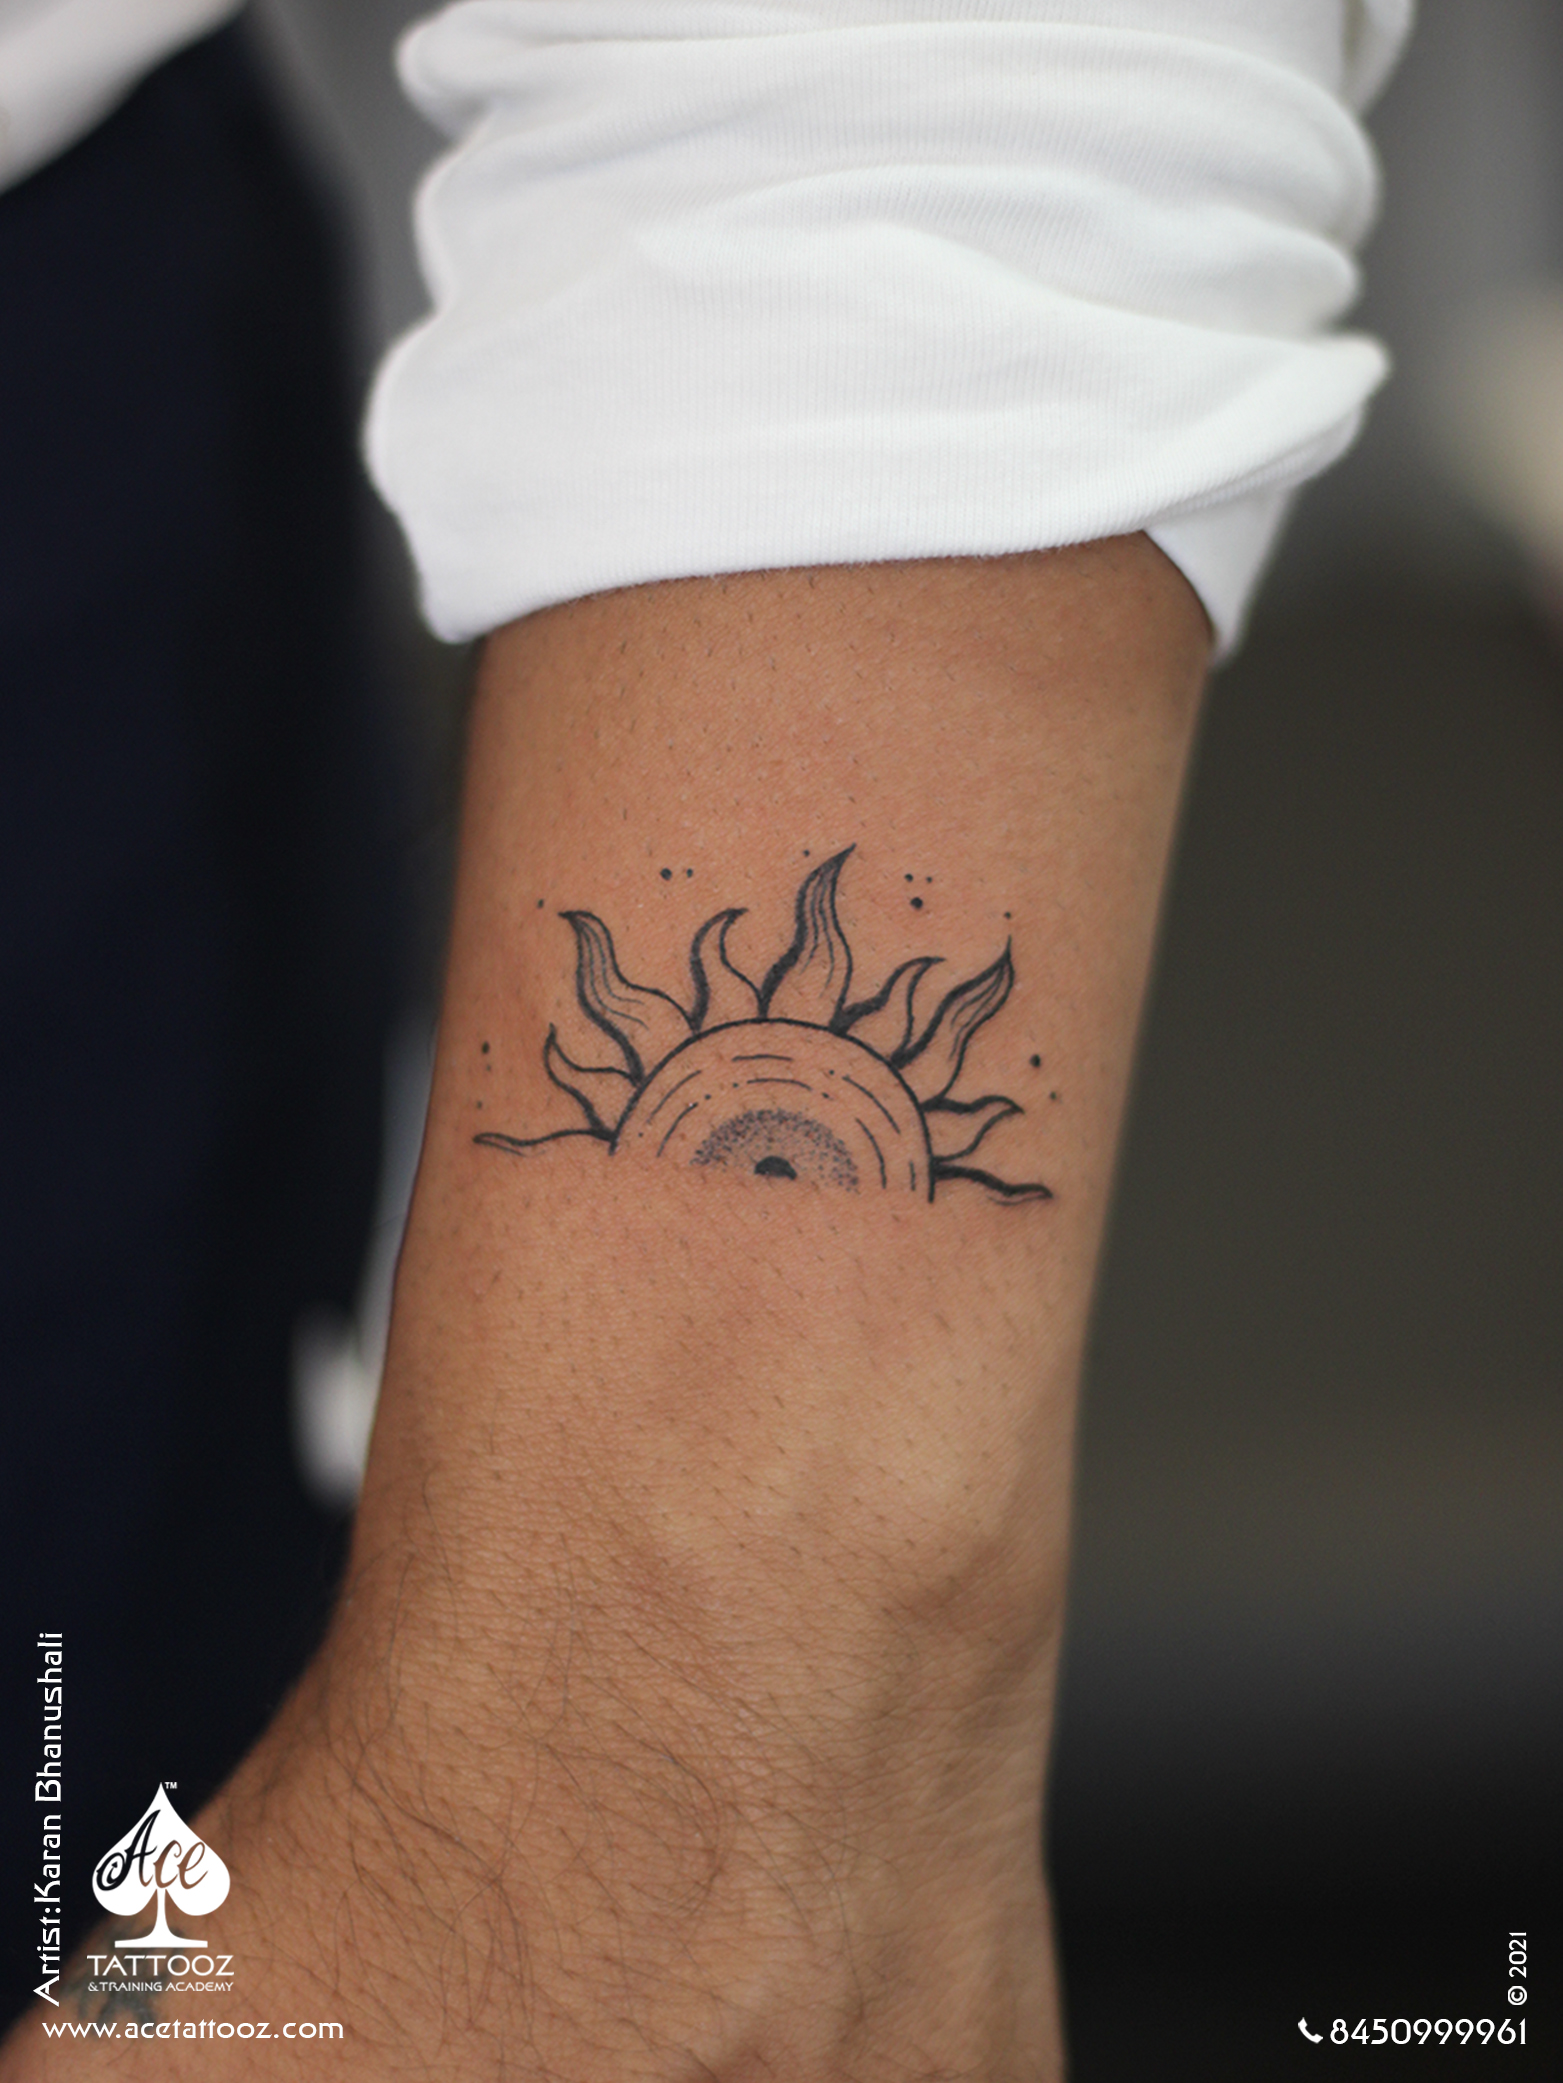 95 Best Sun Tattoo Designs  Meanings  Symbol of The Universe 2019